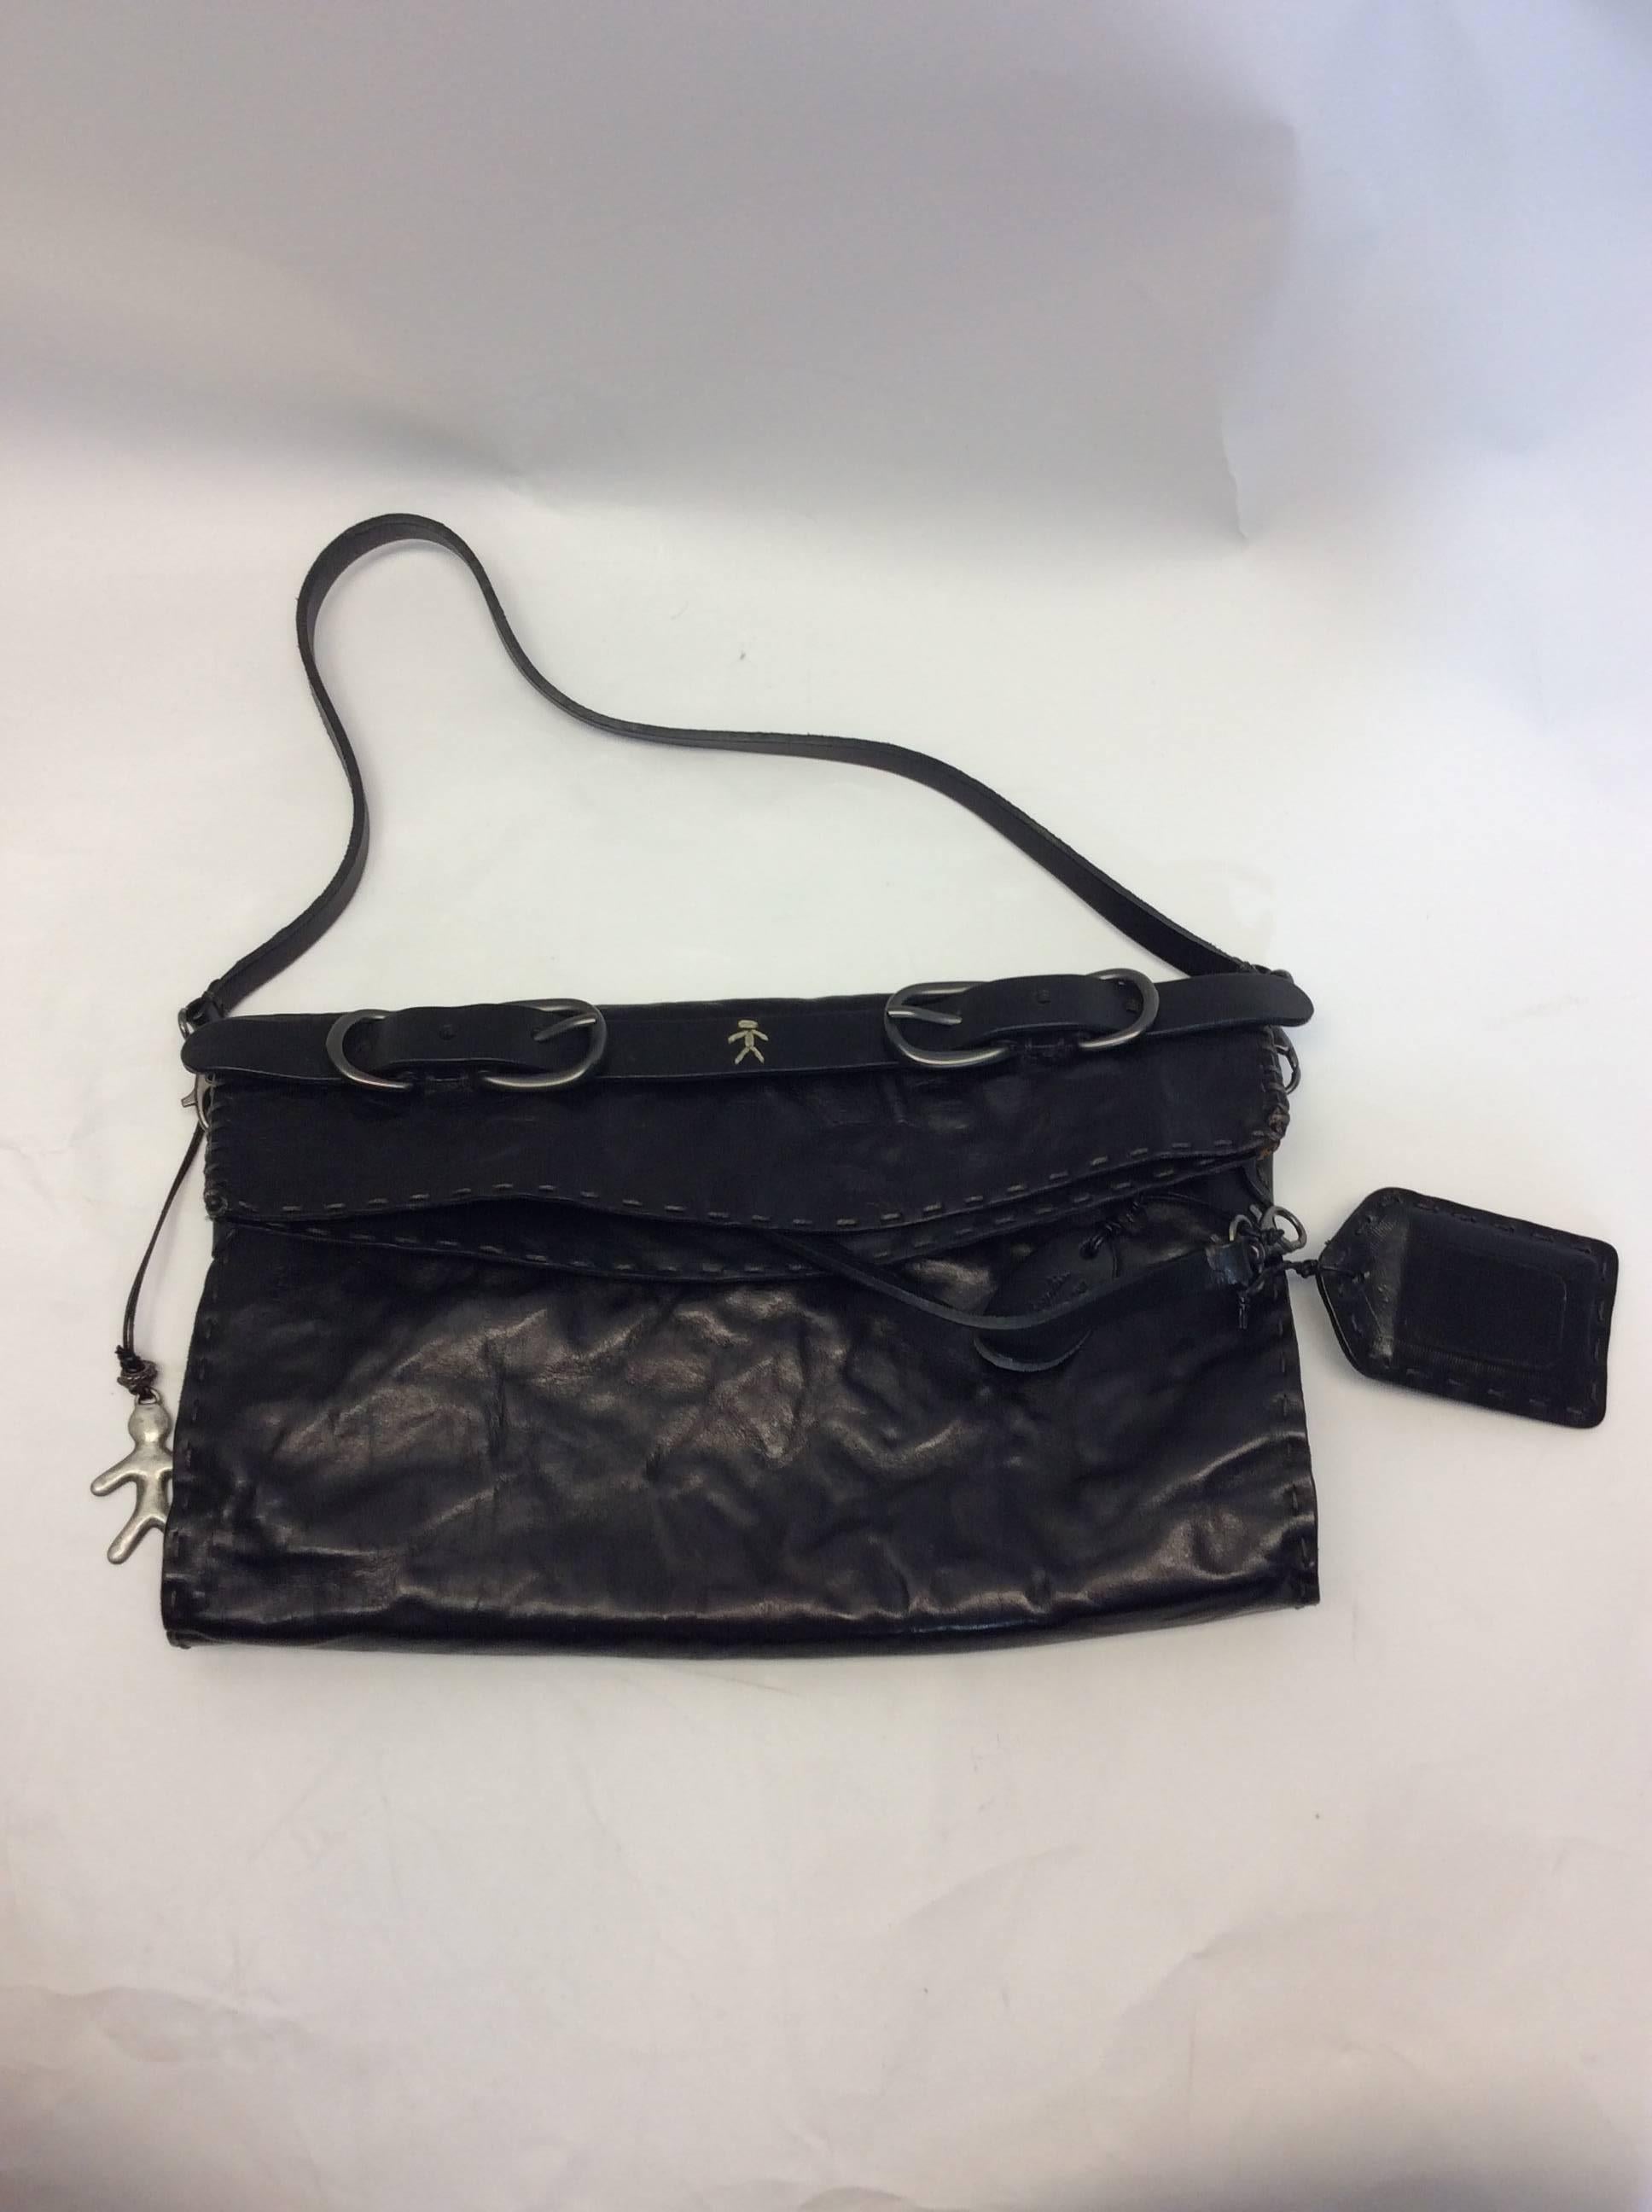 Black Henry Beguelin Leather Small Purse For Sale